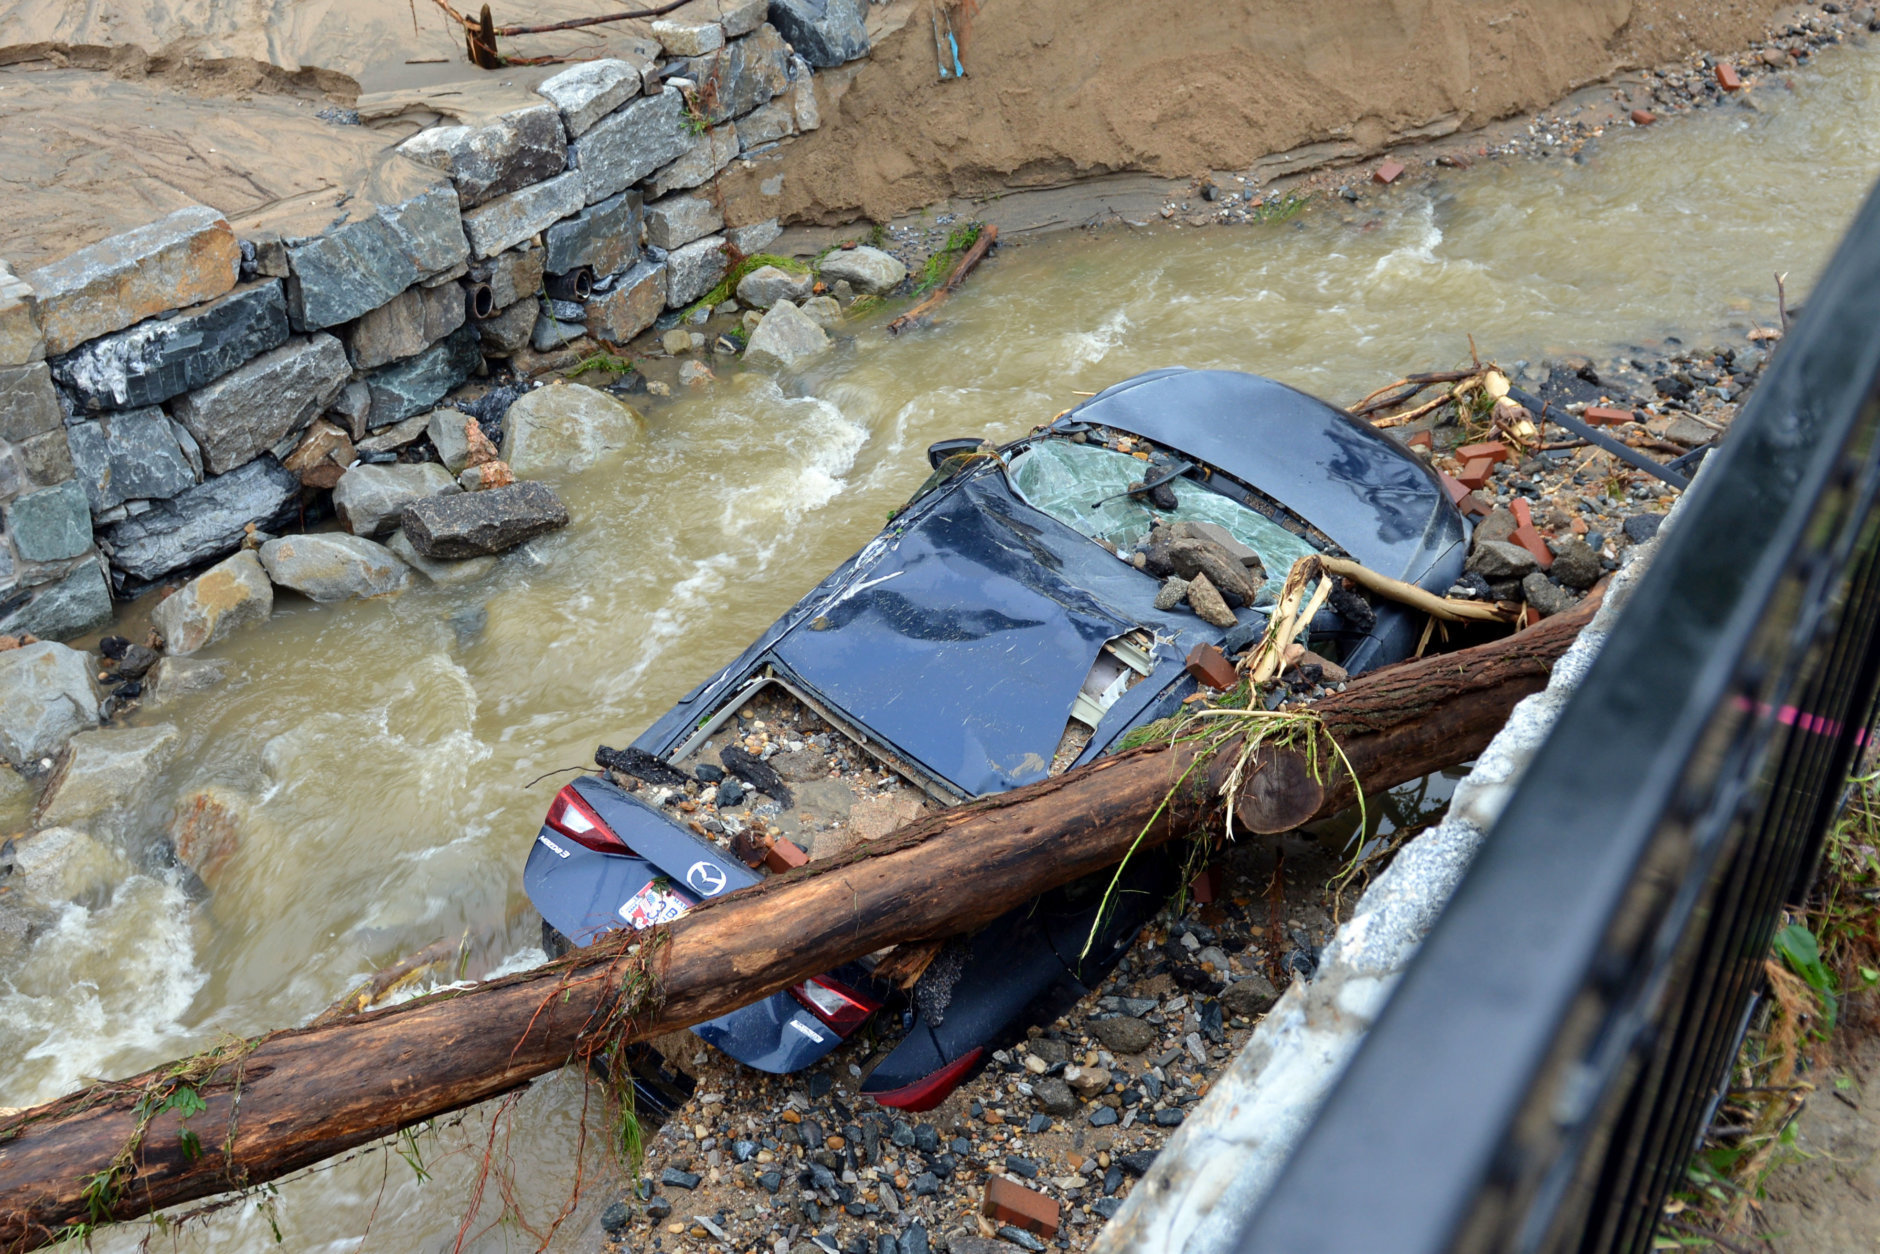 Water moves past a car swept into the riverbank and smashed by a fallen tree is shown just off Main Street in flood-ravaged Ellicott City, Md., Monday, May 28, 2018. Sunday's destructive flooding left the former mill town heartbroken as it had bounded back from another destructive storm less than two years ago. (AP Photo/David McFadden)